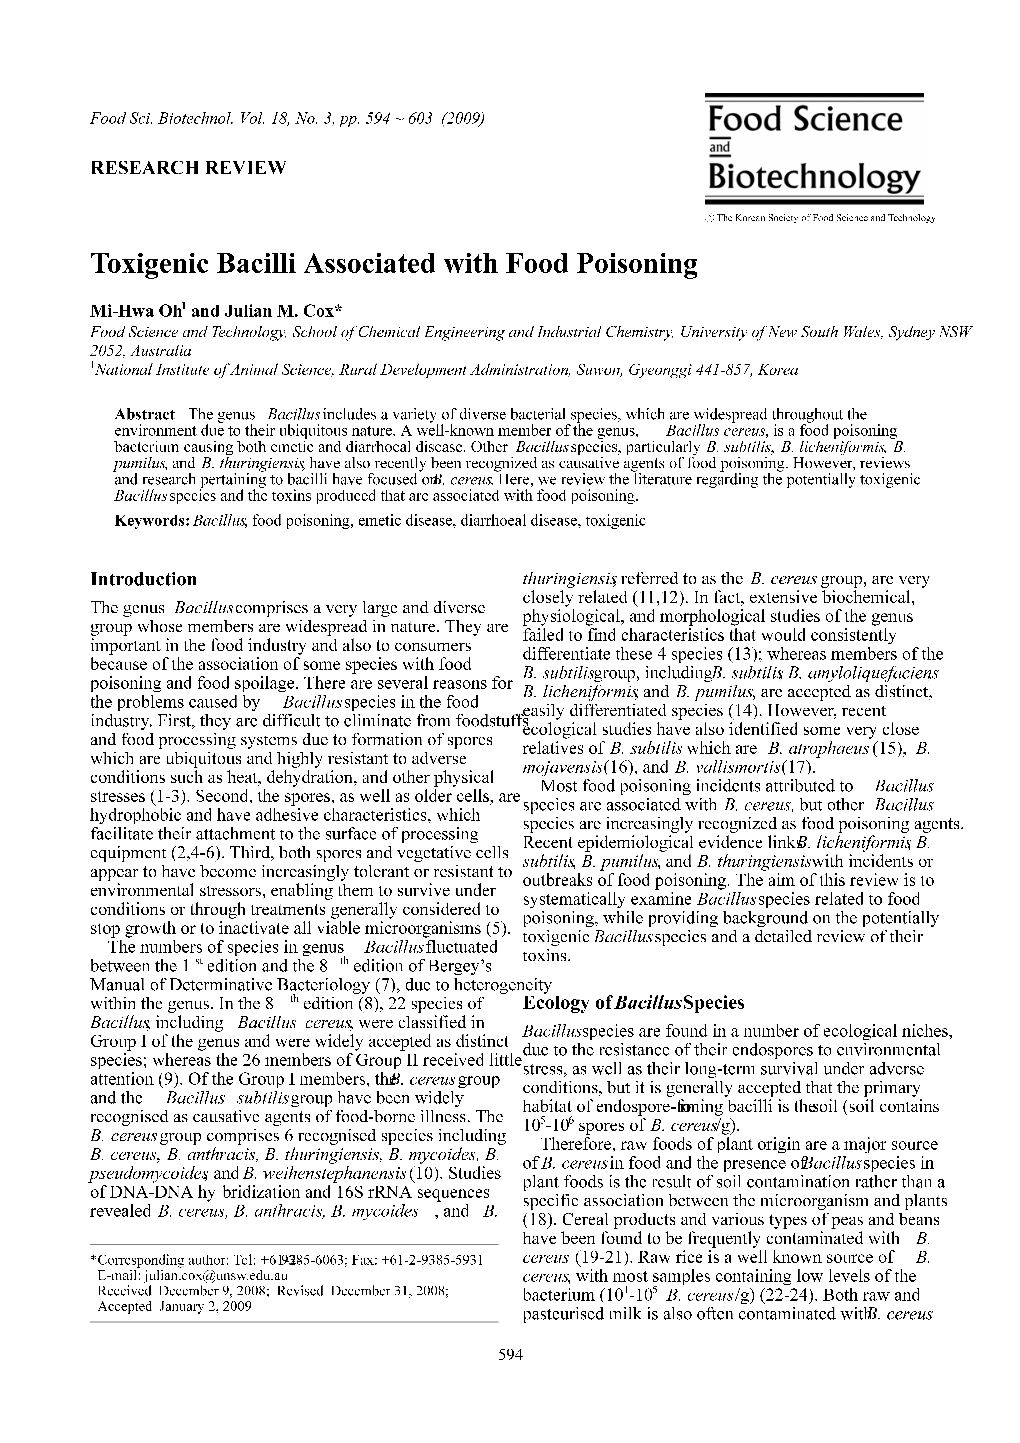 Toxigenic Bacilli Associated with Food Poisoning